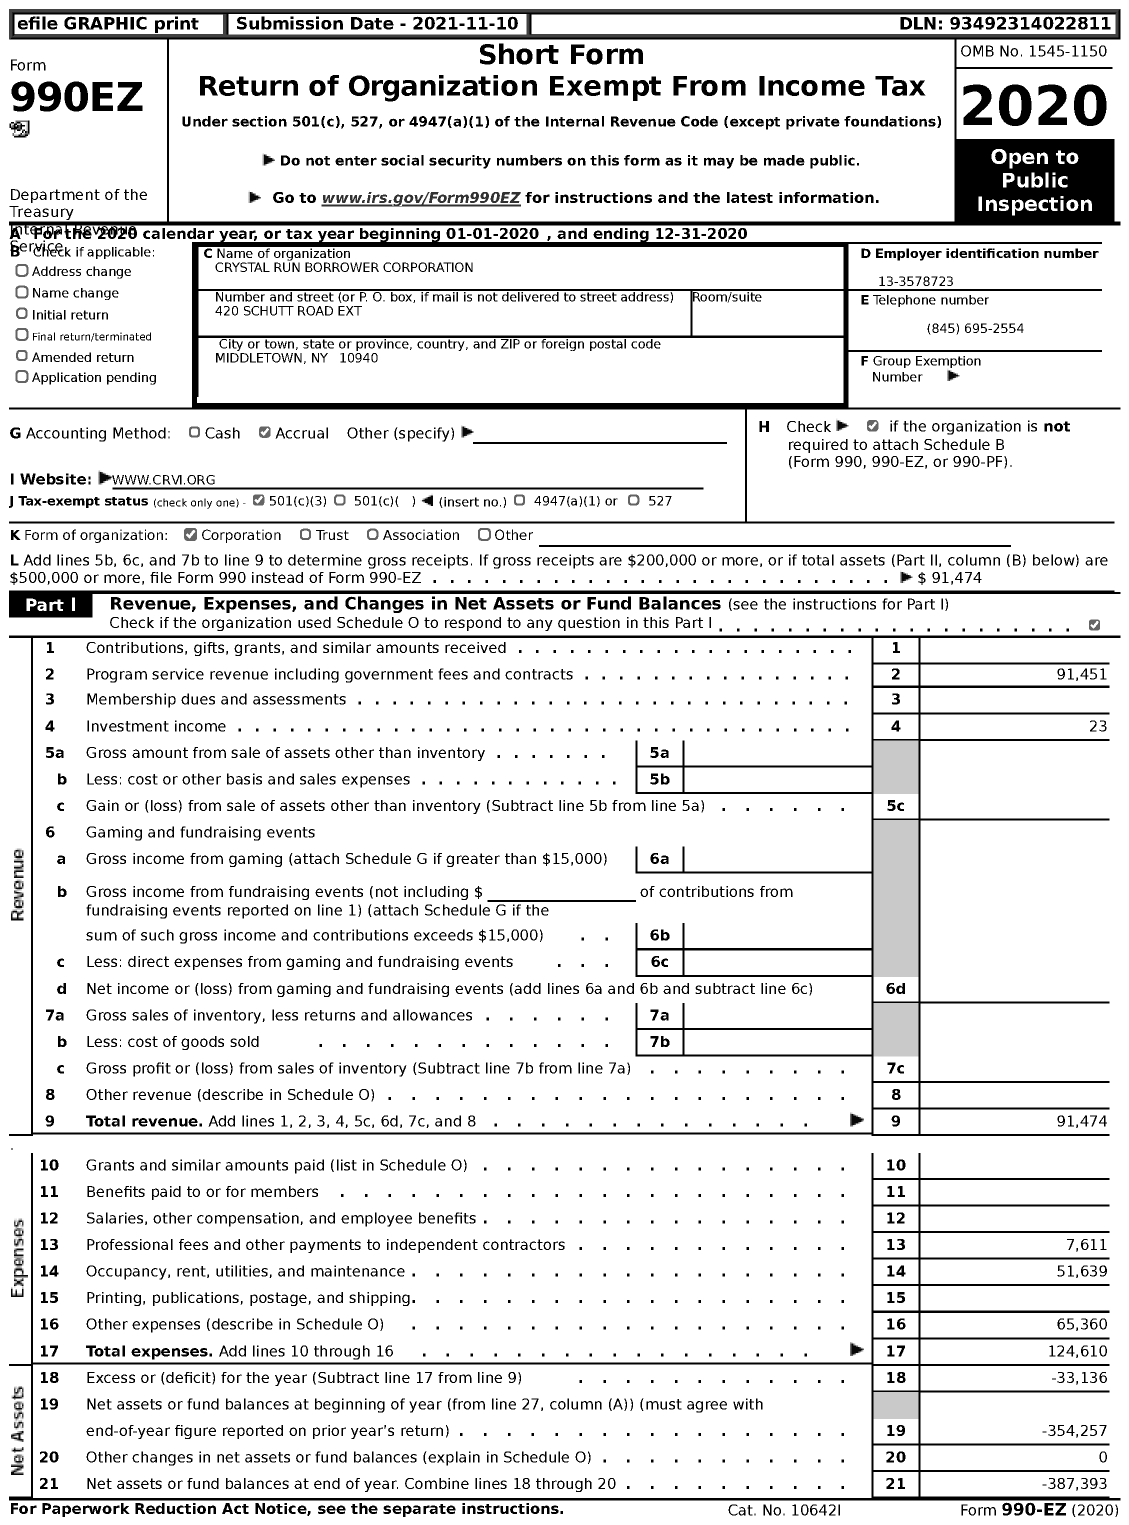 Image of first page of 2020 Form 990EZ for Crystal Run Borrower Corporation